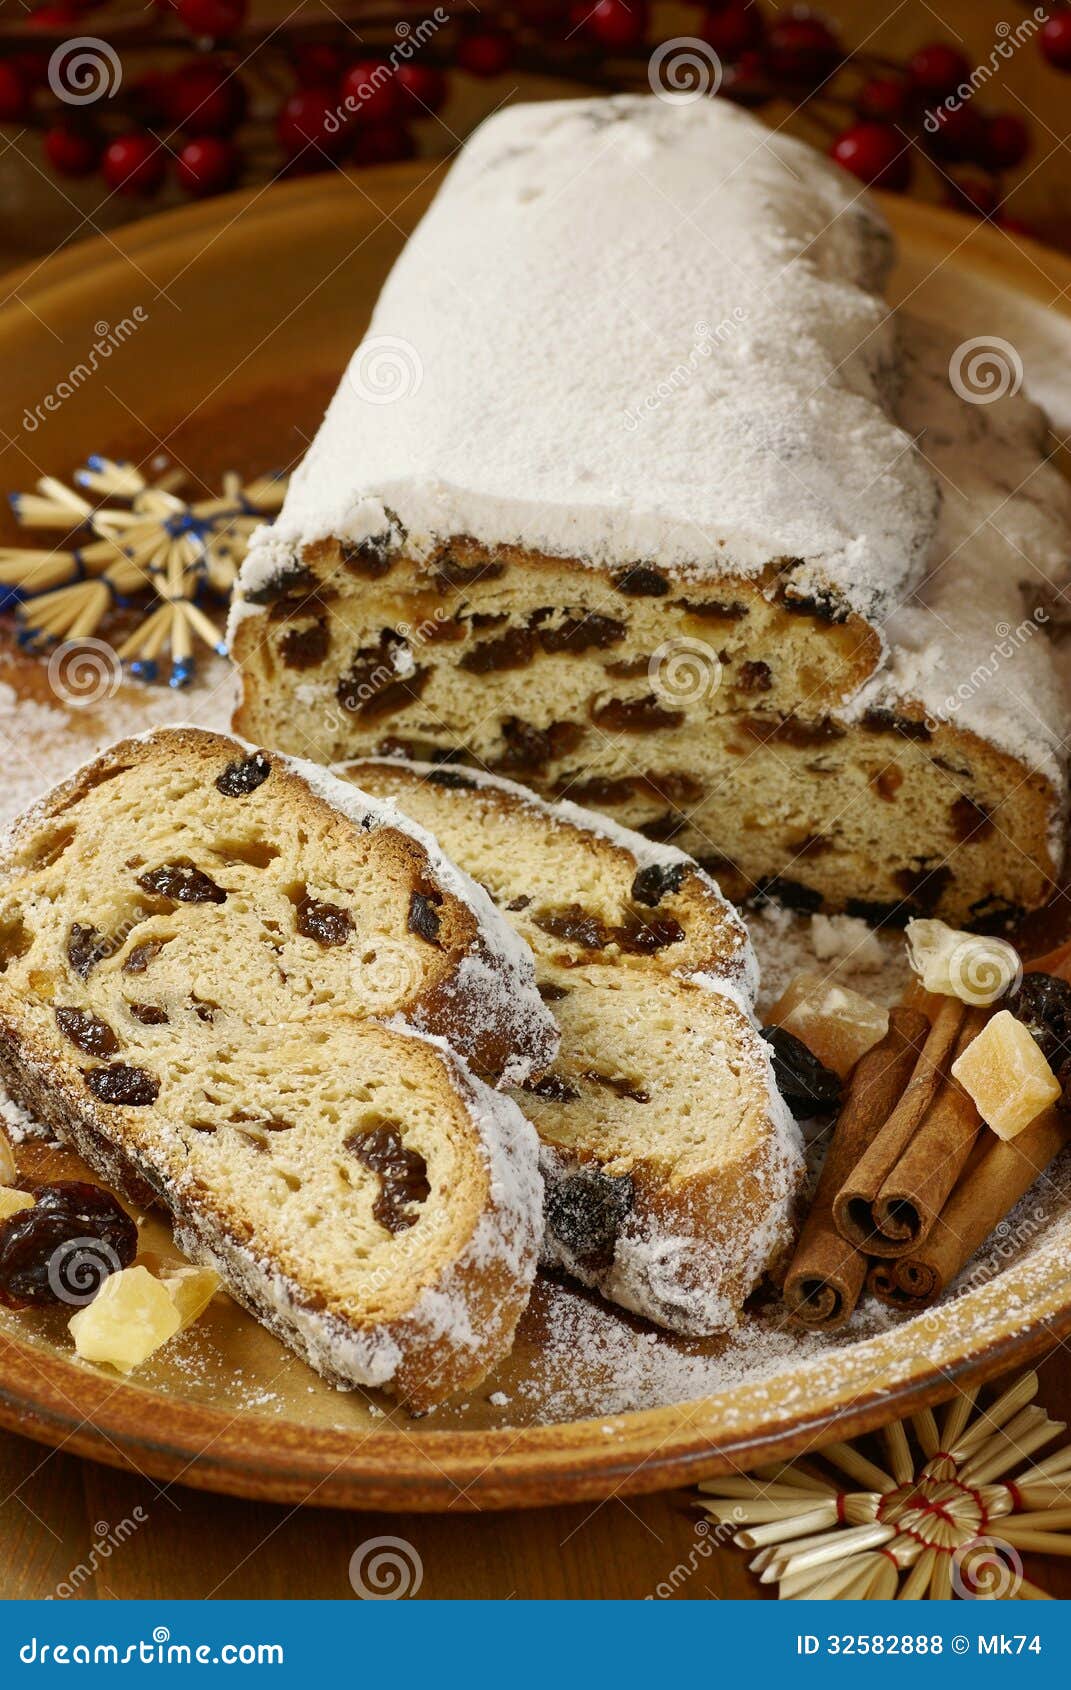 Christmas stollen stock photo. Image of sweet, food, tradition - 32582888